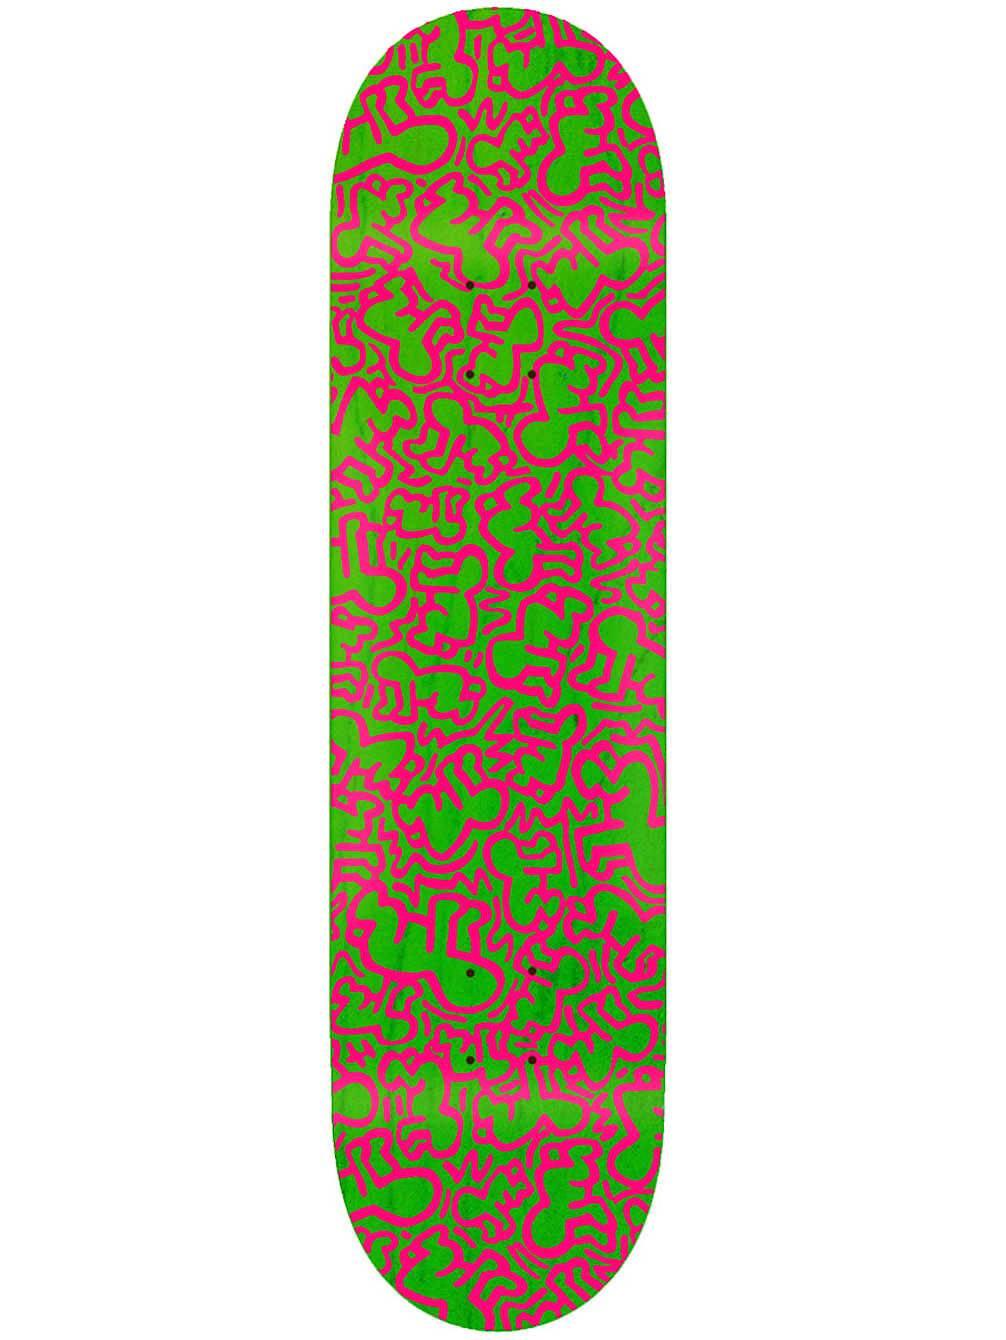 Keith Haring Radiant Baby Skateboard Deck - Art by (after) Keith Haring